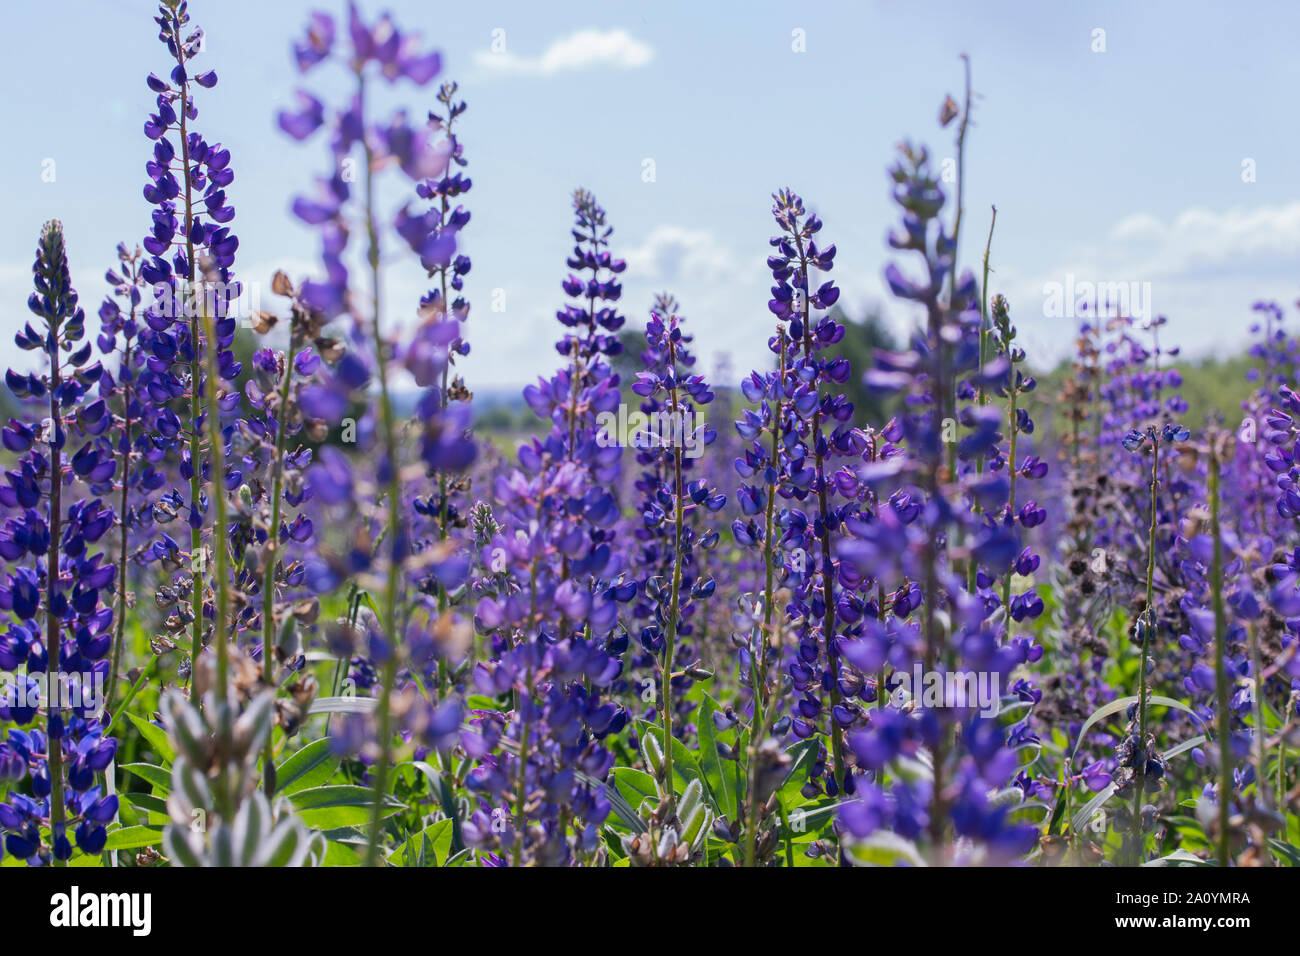 Blooming meadow of blue lupins, selective focus horizontal floral landscape background. Blossom lupine flower, summer field with blue flowers against Stock Photo